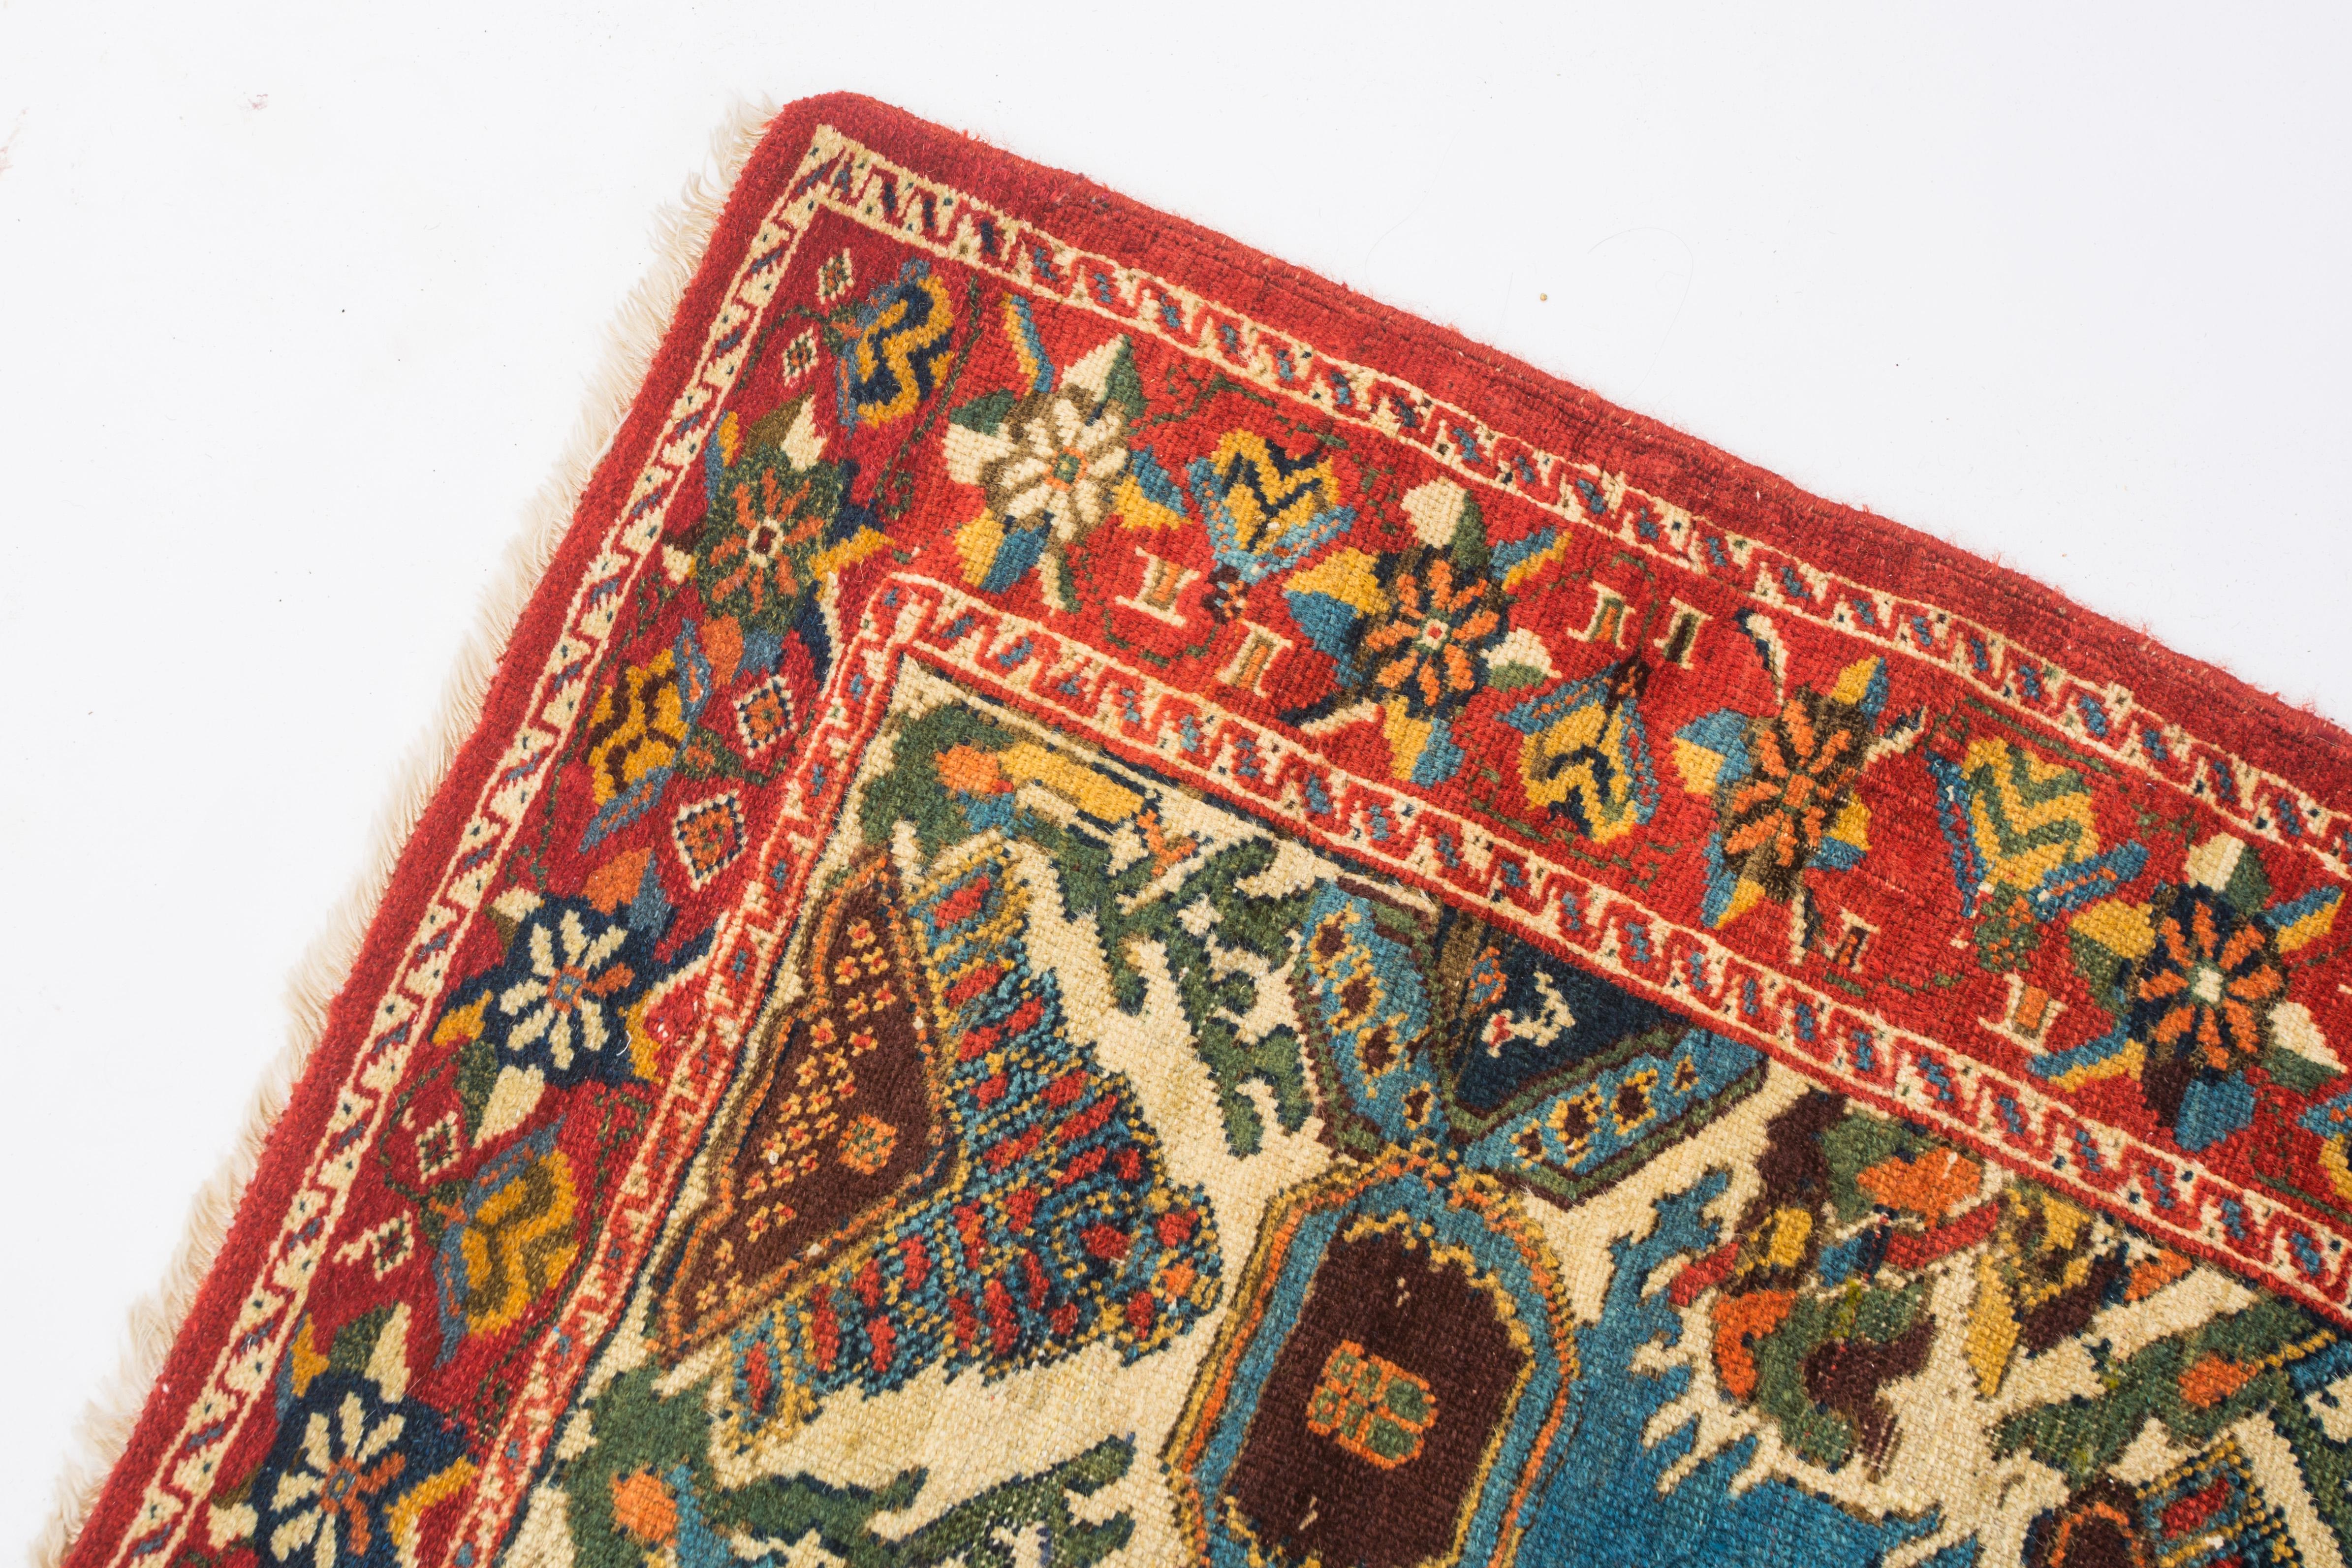 Wool Astonishing 19th Century Rare Afshar Tribal rug  featured in famous book  For Sale